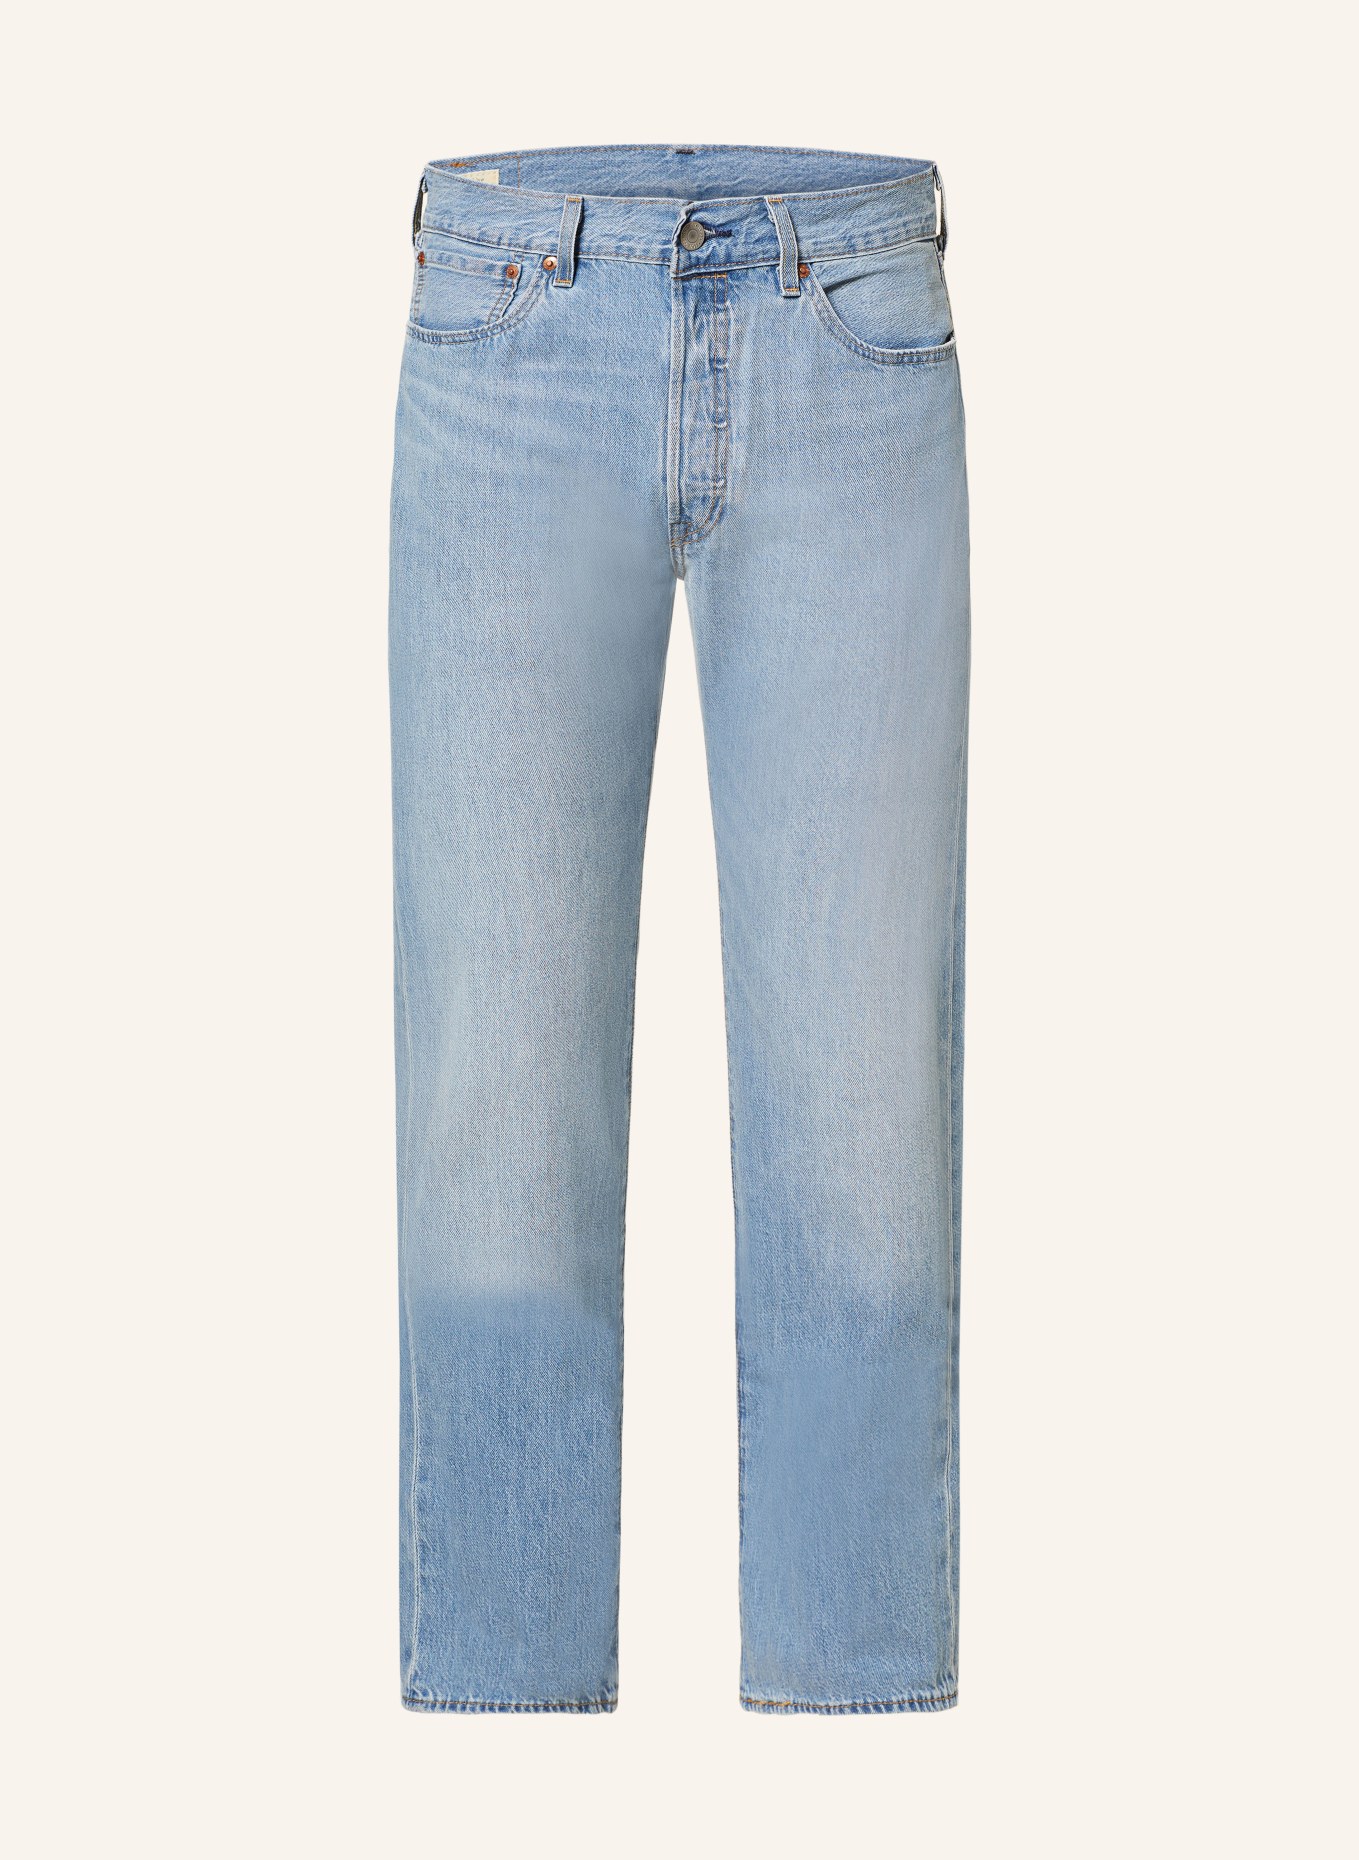 Levi's® Jeans 501 straight fit, Color: 24 Med Indigo - Worn In (Image 1)